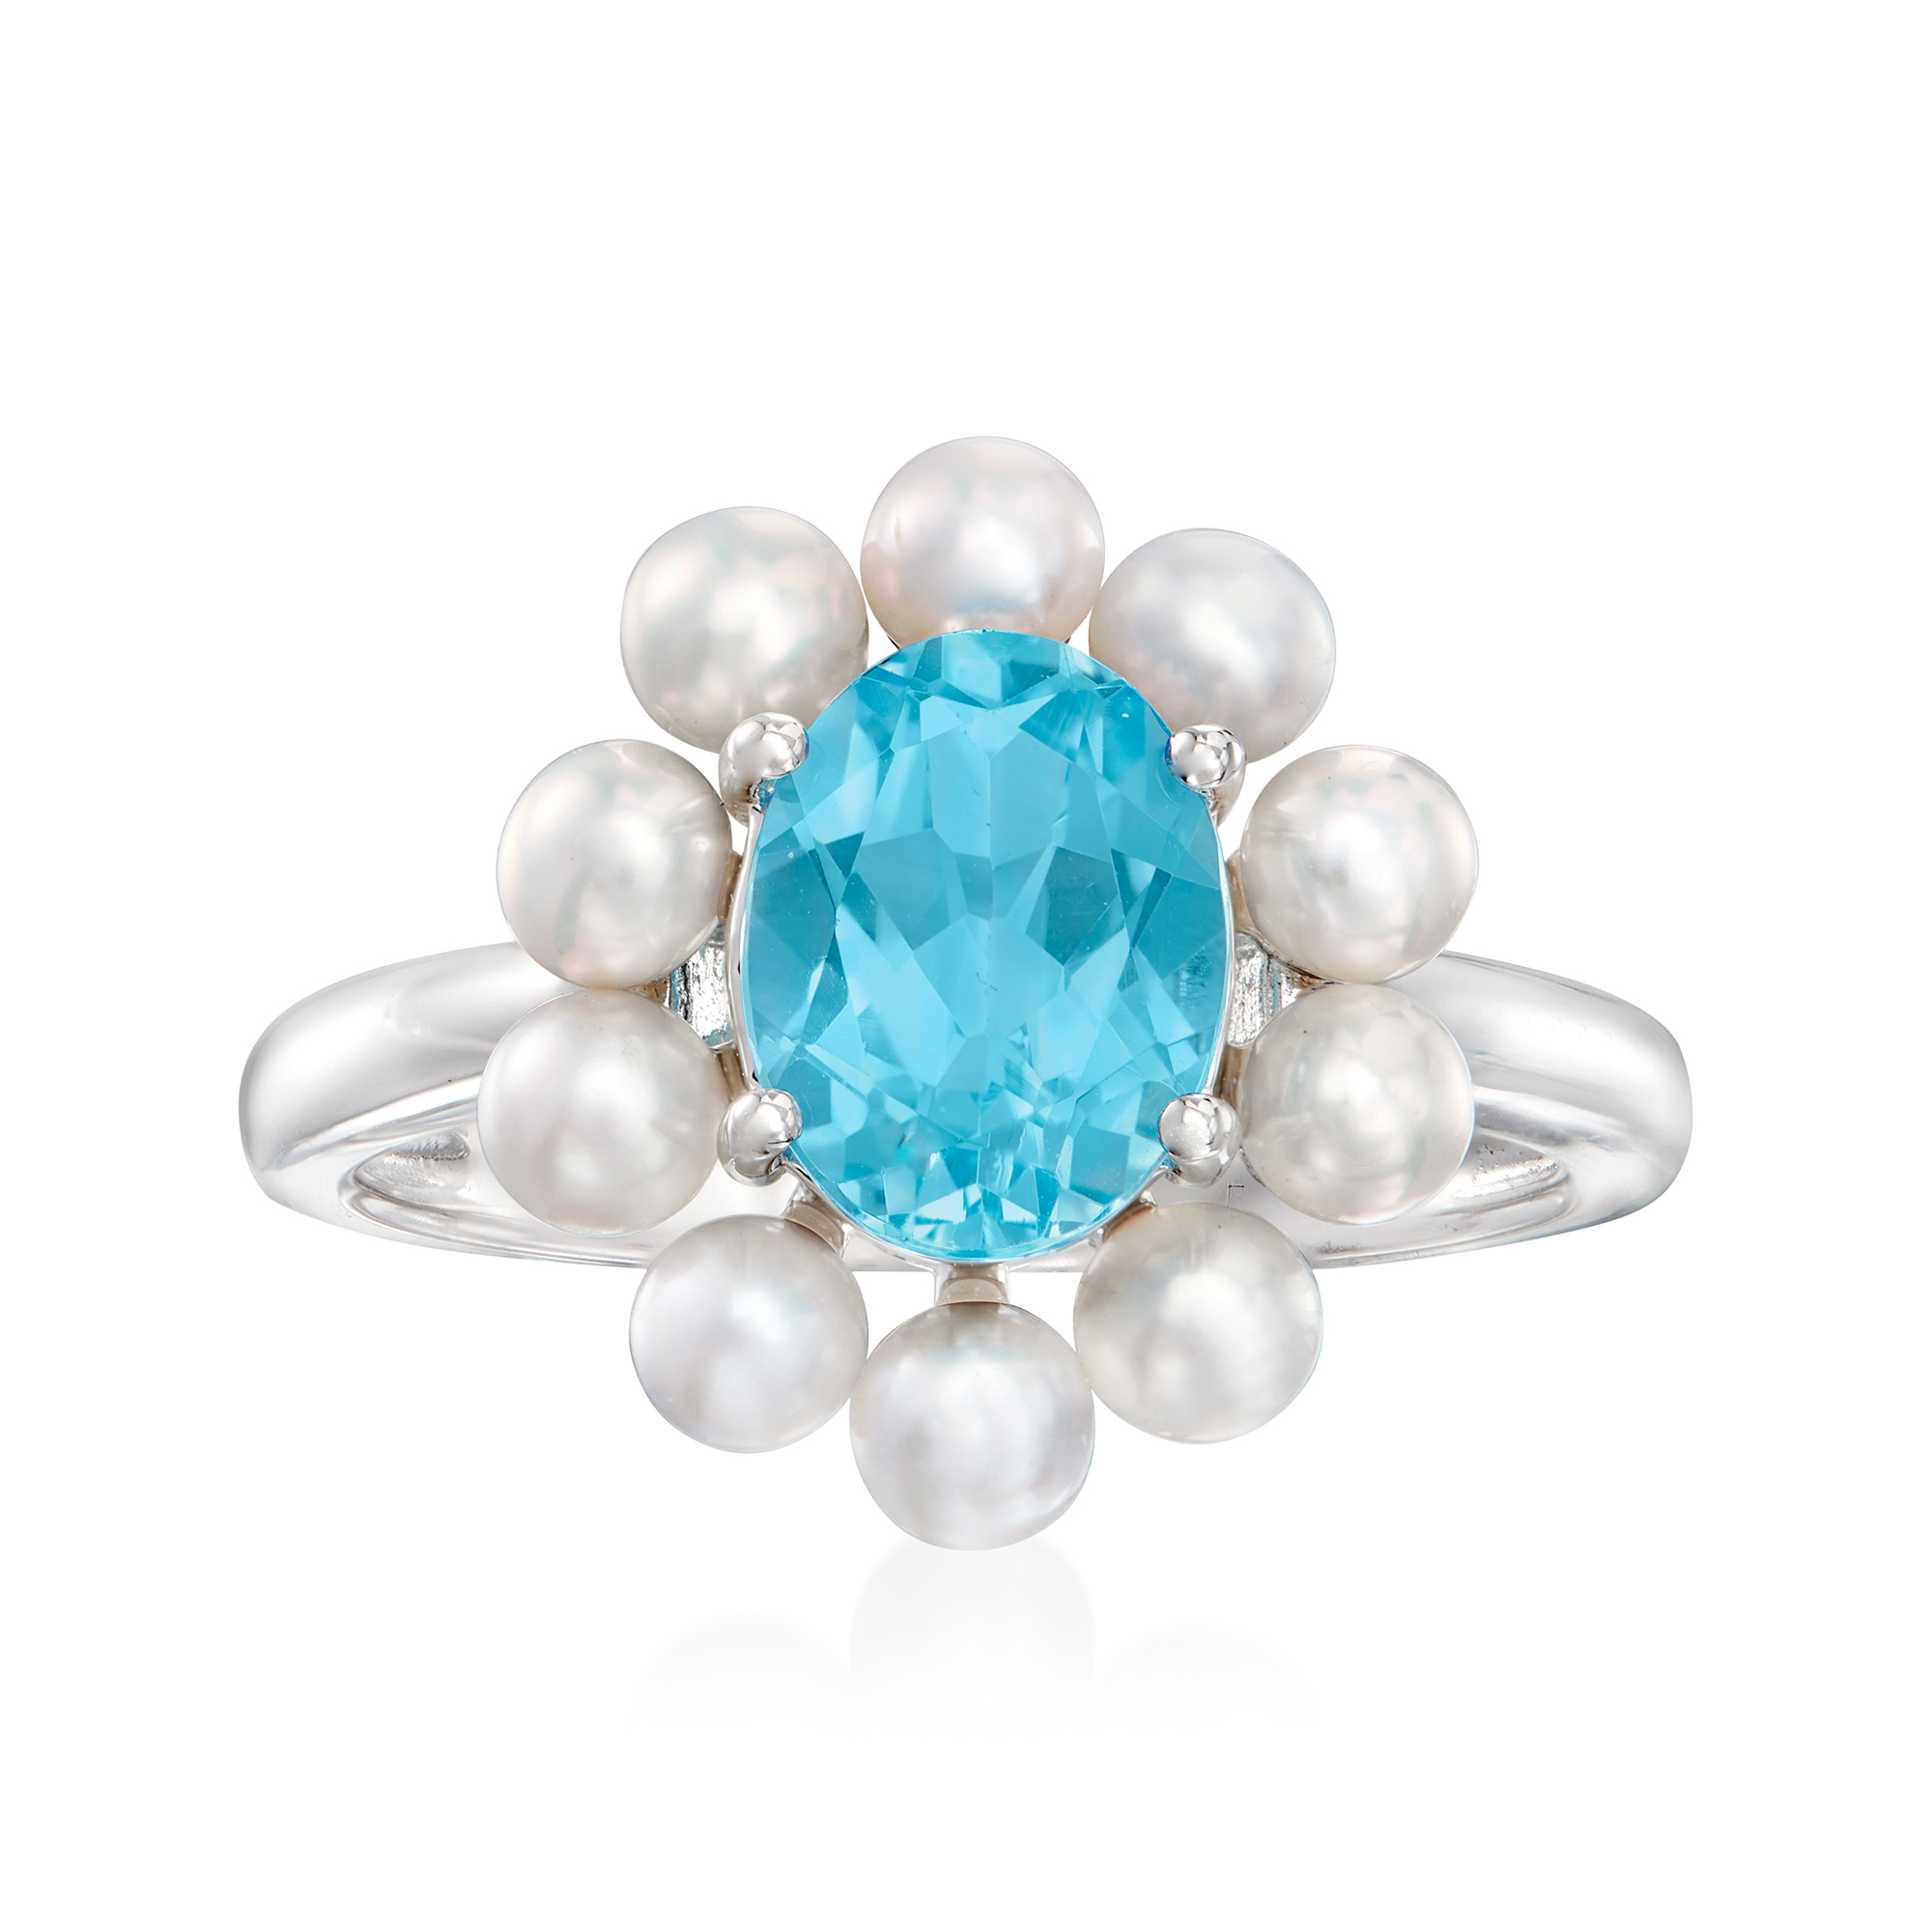 2.20 Carat Swiss Blue Topaz and 3mm Cultured Pearl Ring in Sterling Silver  | Ross-Simons